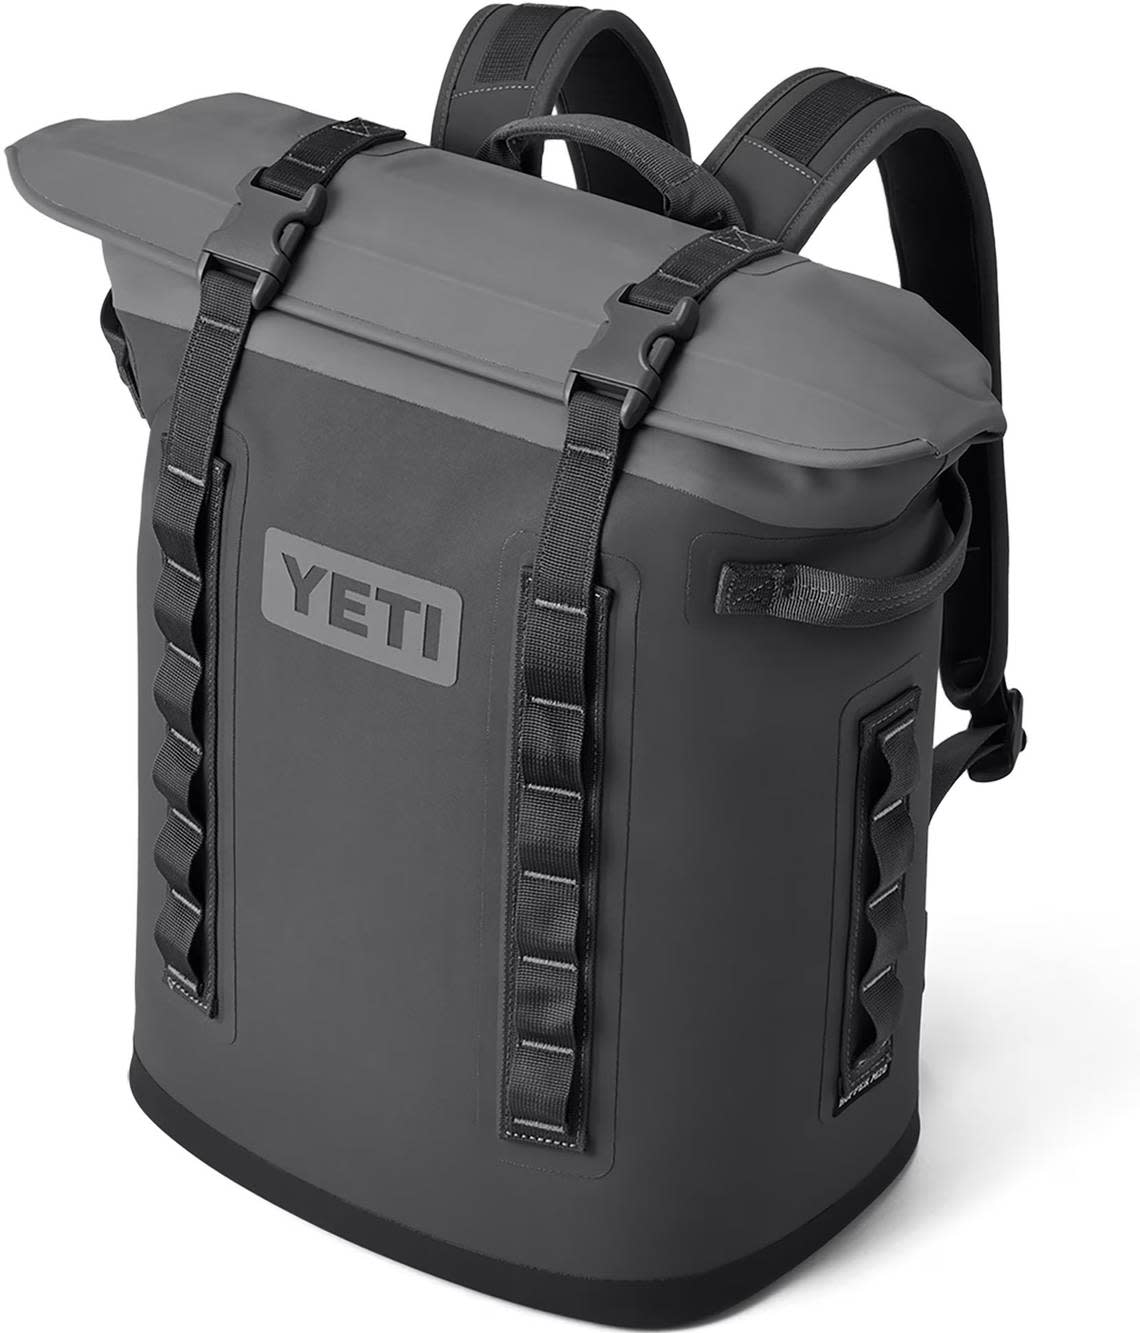 This backpack carries beverages or ice.